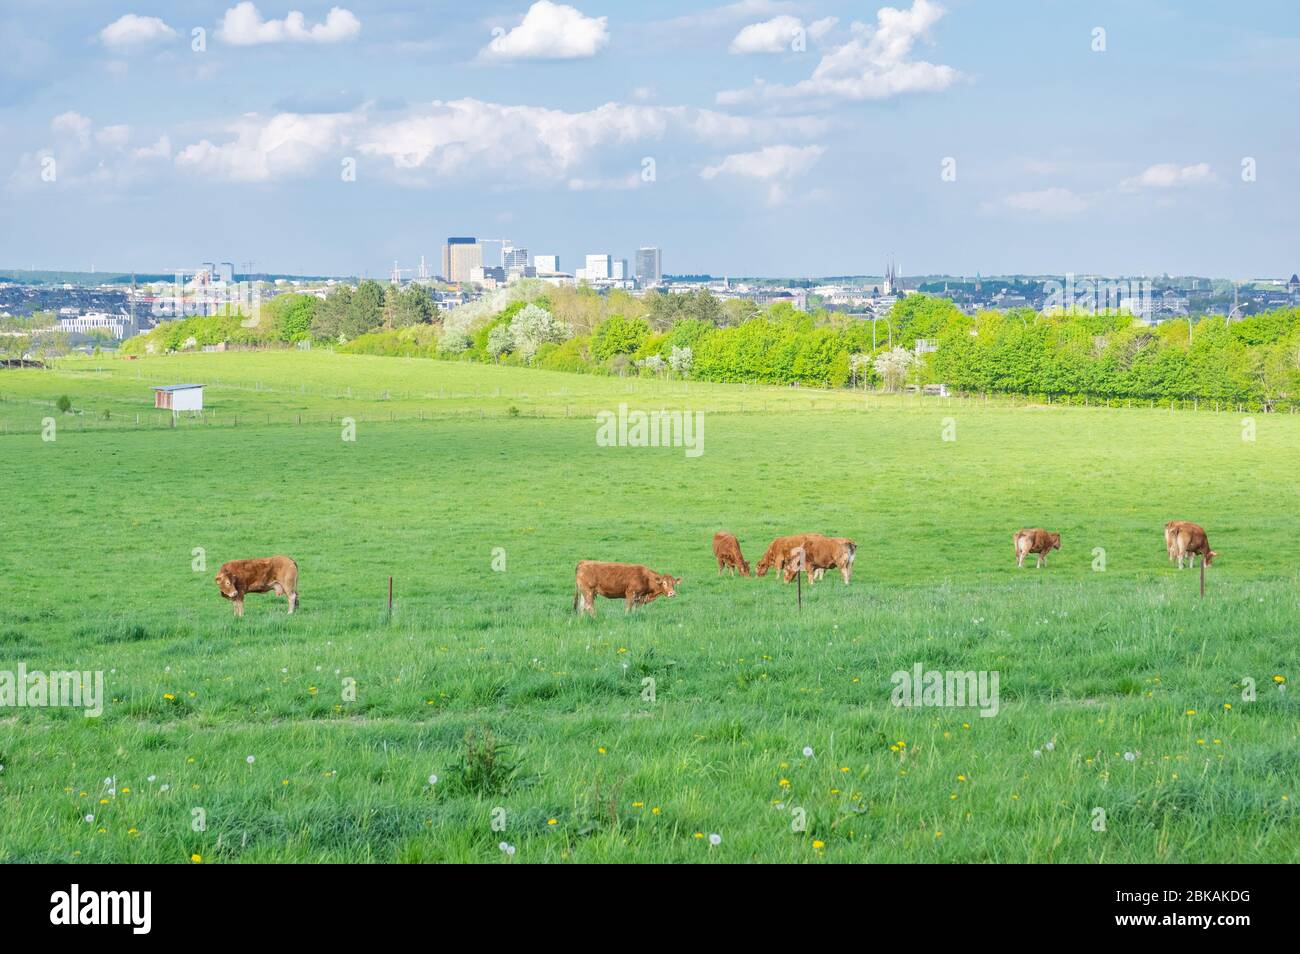 Rural idyll in the vicinity of Luxembourg city with cattle grazing on the pasture and the Kirchberg office towers in the background Stock Photo